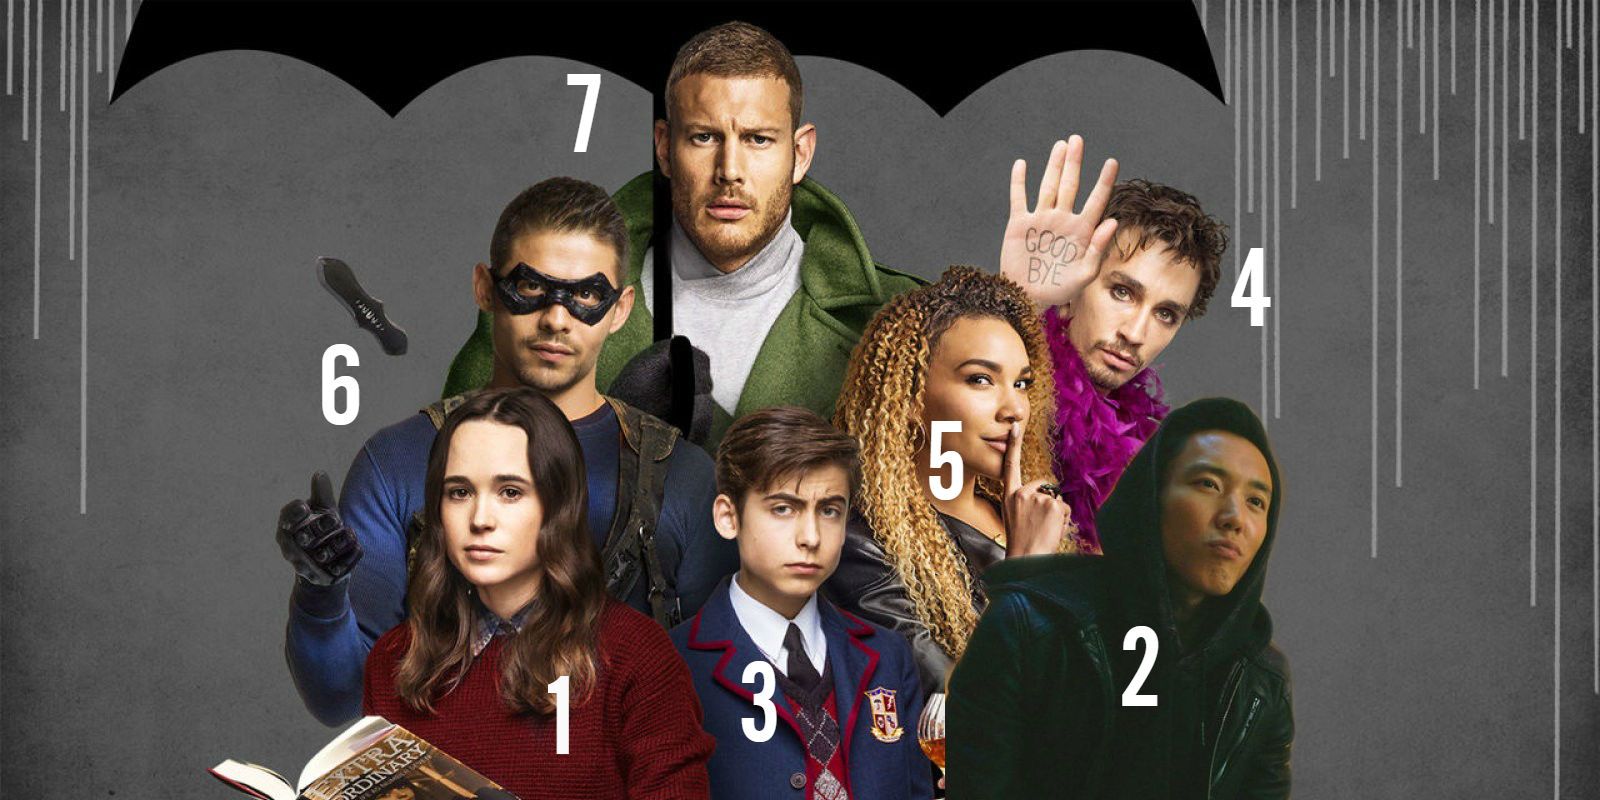 The Umbrella Academy cast number theory